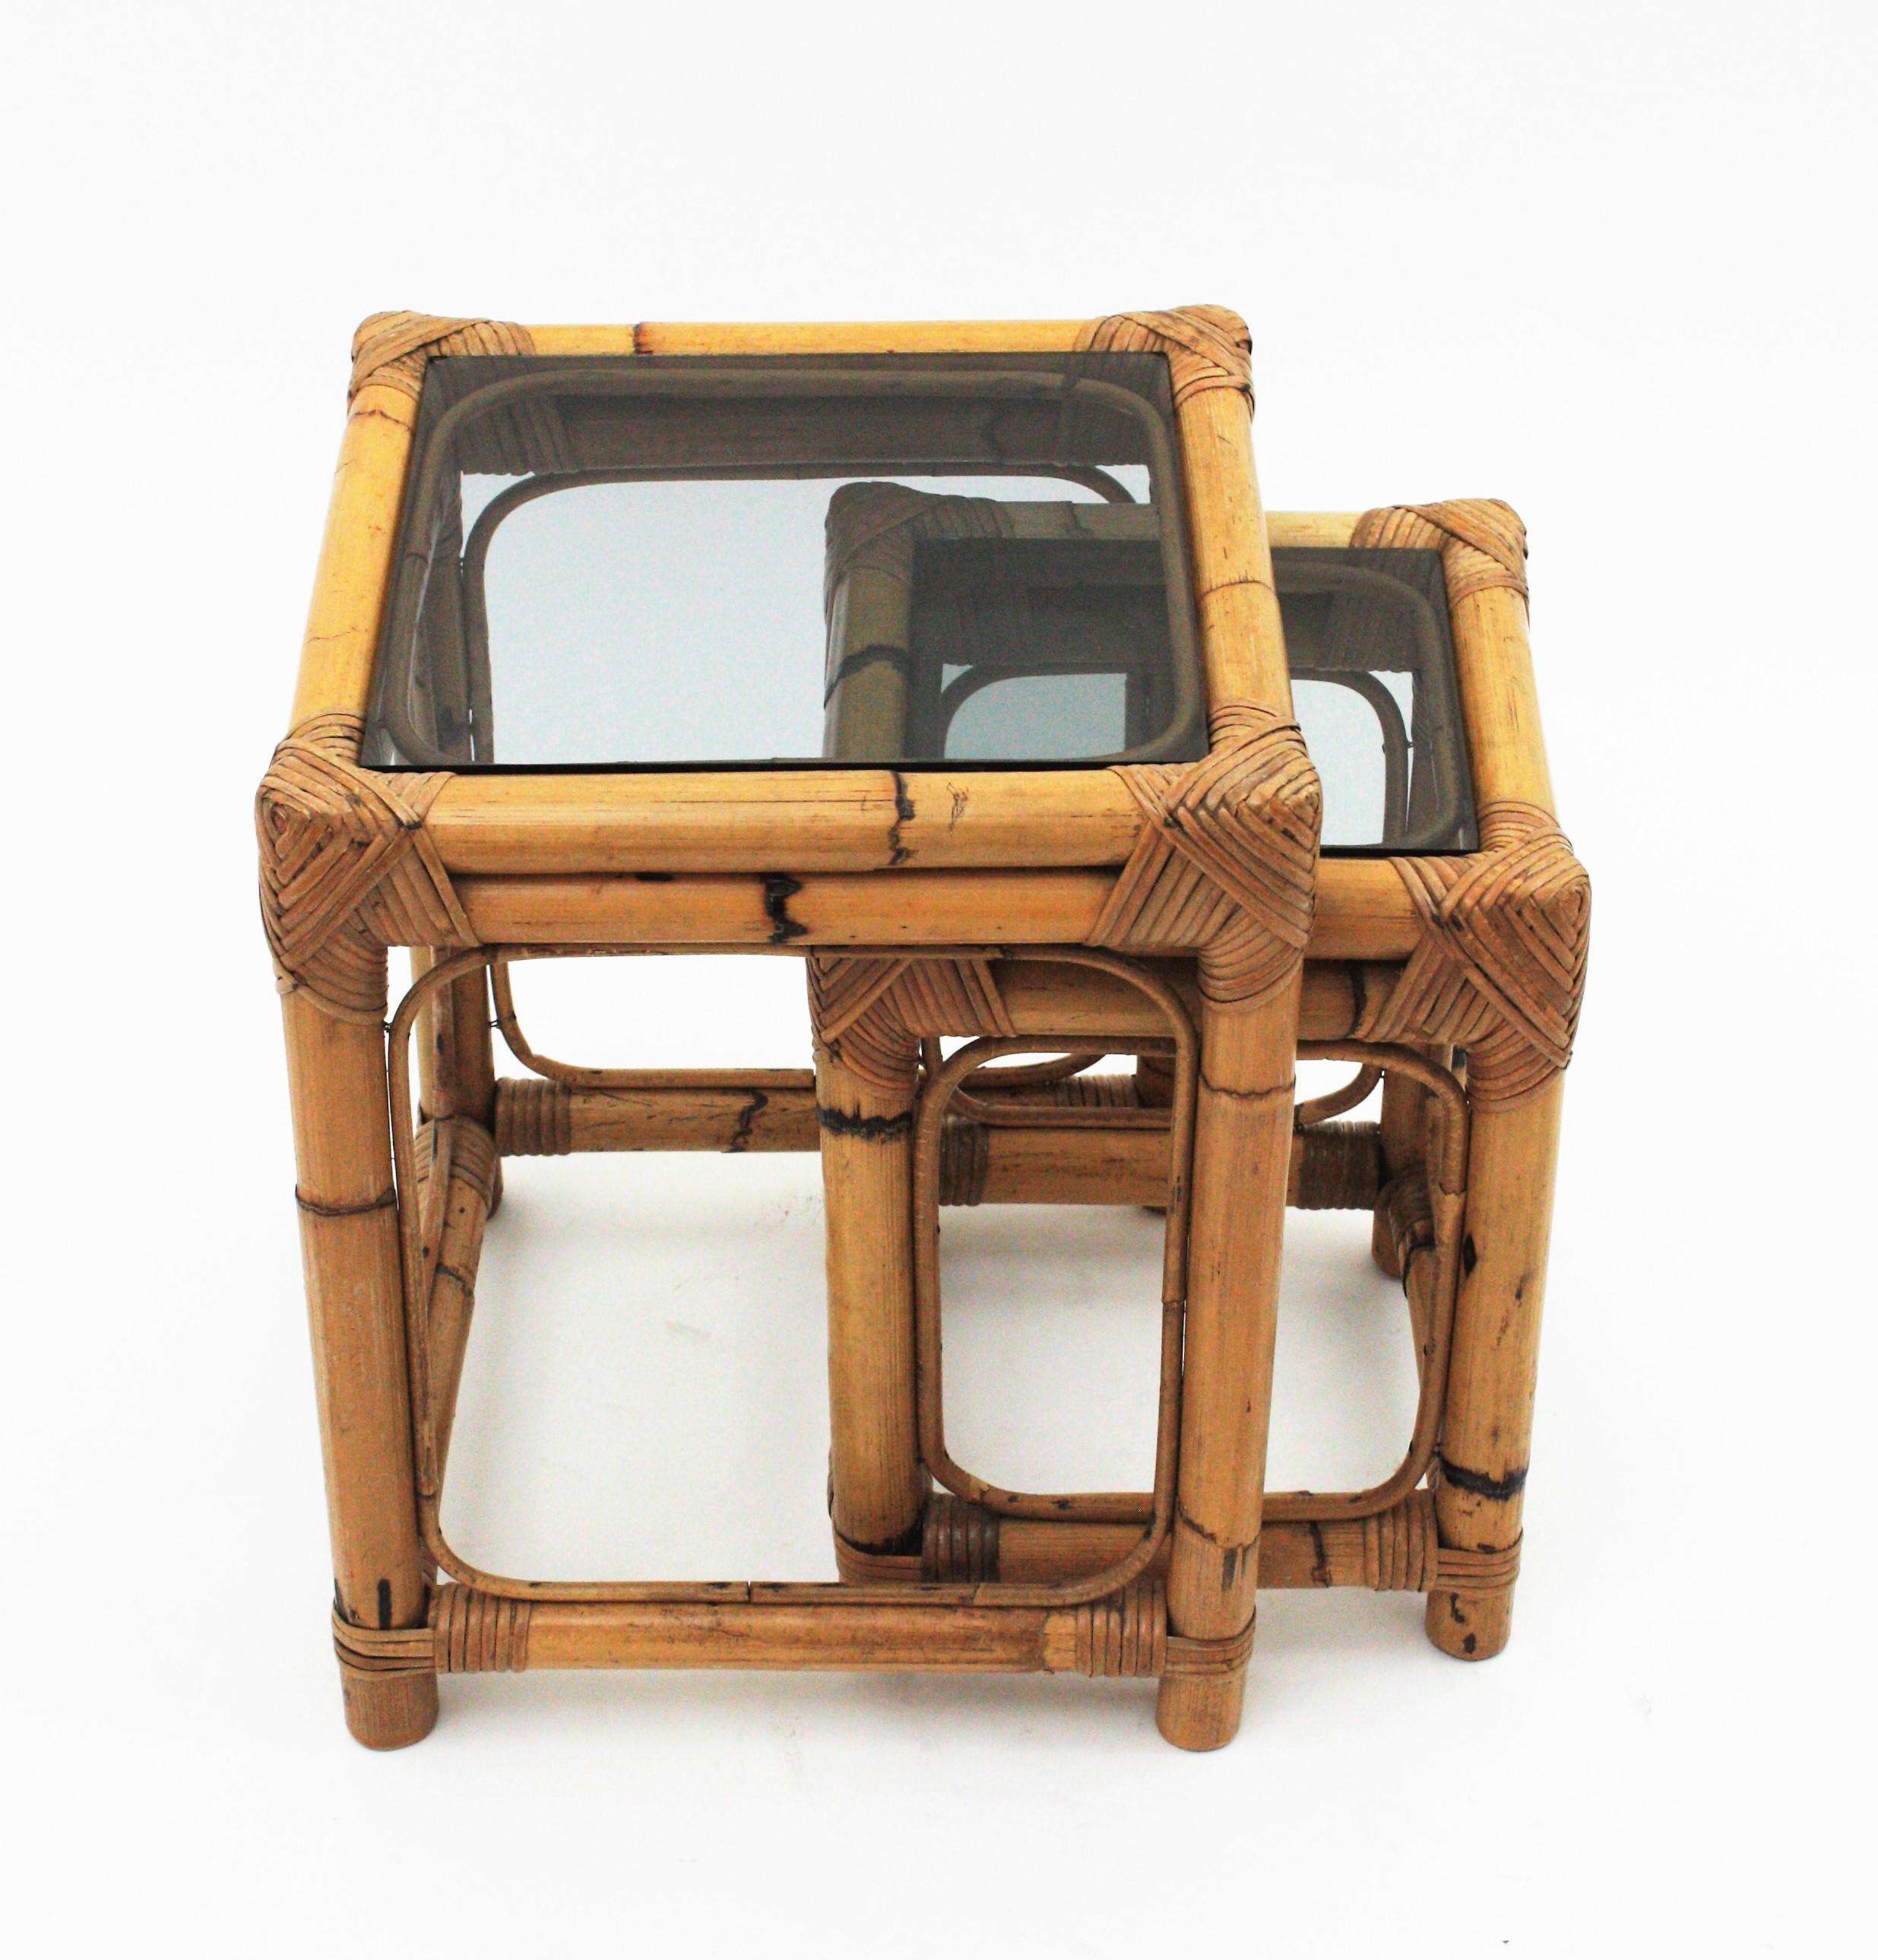 Set of two bamboo and smoked glass nest of tables, Spain, 1960s.
Beautiful to be used as occasional tables, side or end tables. These nesting tables will add a fresh and natural accent to any place.
On sale as a set of two.
Measures:
Large 34,5